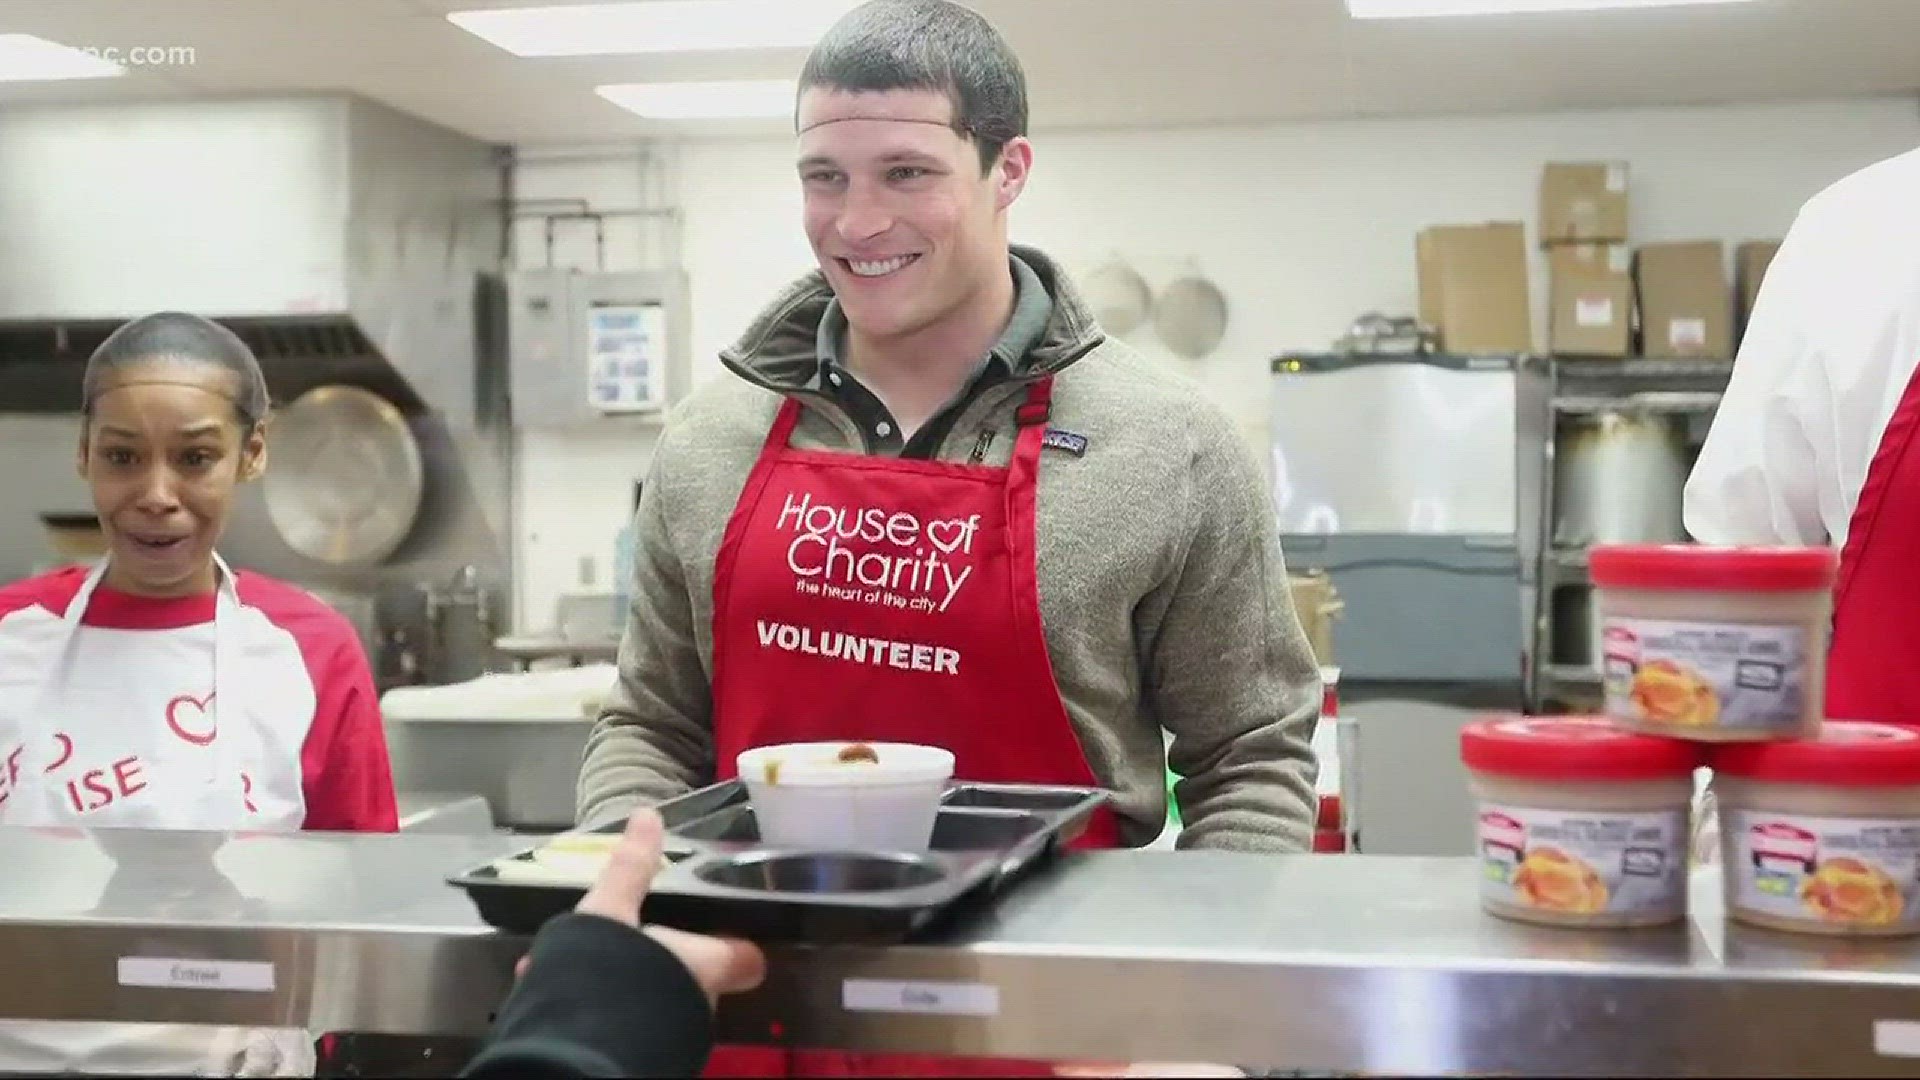 Panthers linebacker Luke Kuechly teamed up with Campbell's Chunky Soup to serve meals at a soup kitchen in Minneapolis ahead of Super Bowl 52.